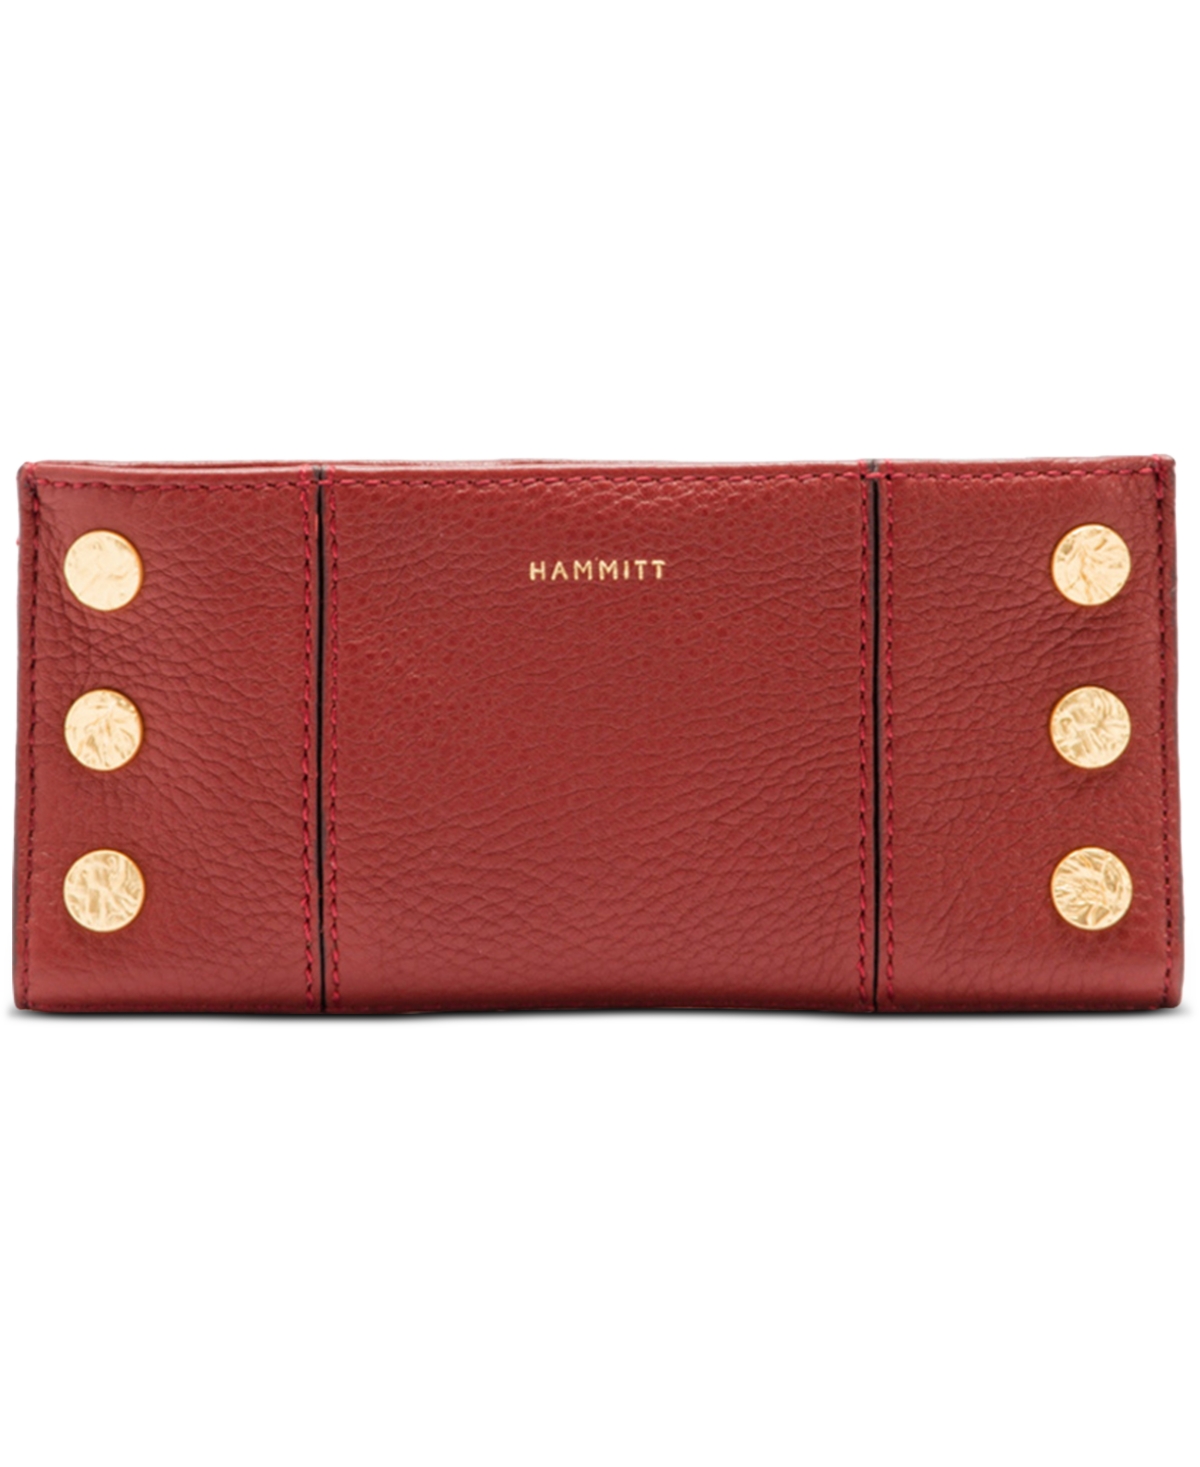 Hammitt 110 North Leather Wallet In Brown